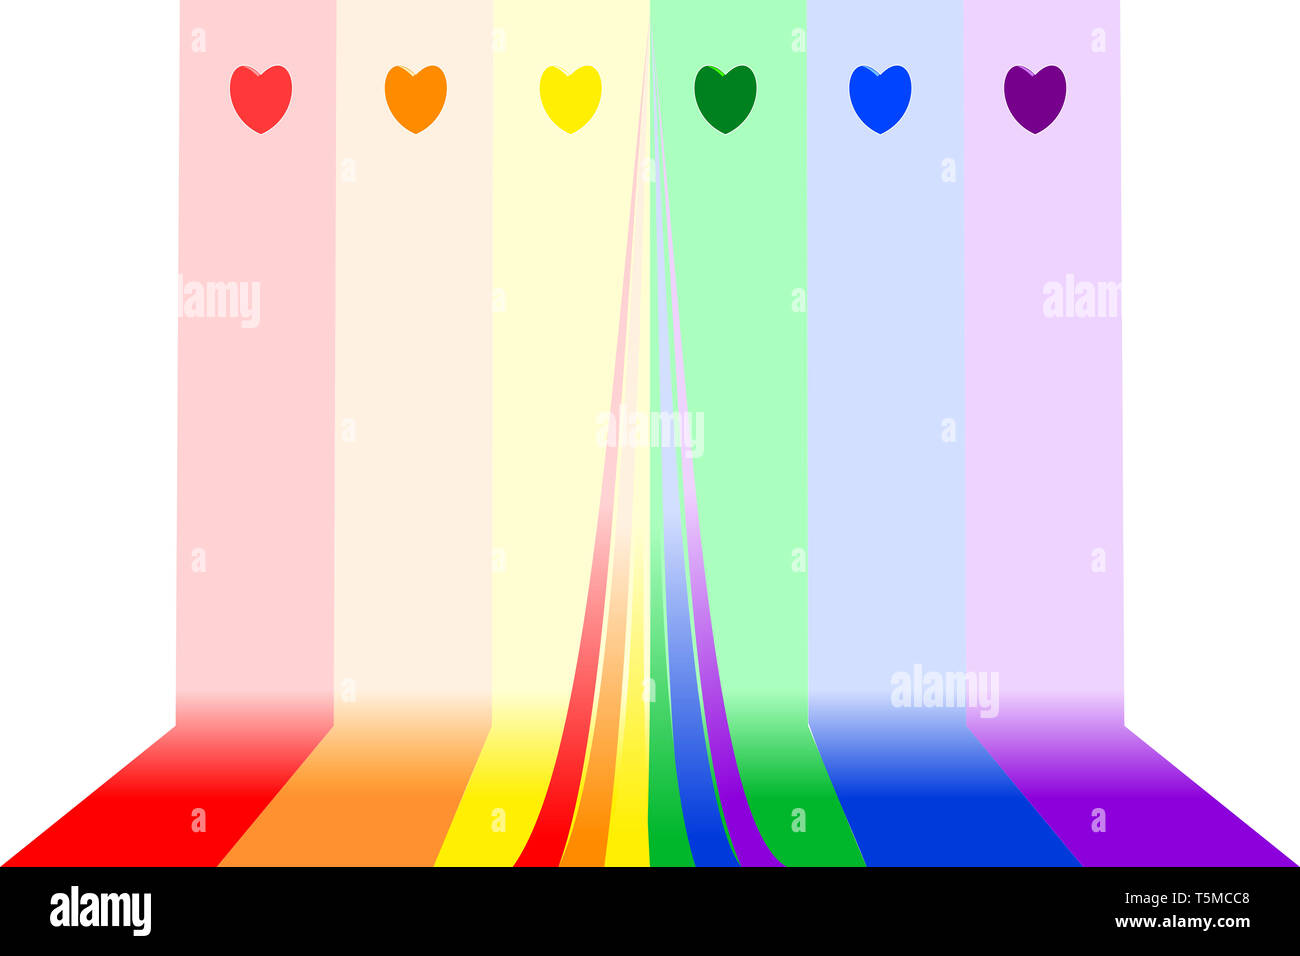 Colorful Rainbow Stripes With Hearts On Top Center Copy Space The Image Be Used As Background Backdrop Image Montage In Graphic Design Book Cover Stock Photo Alamy